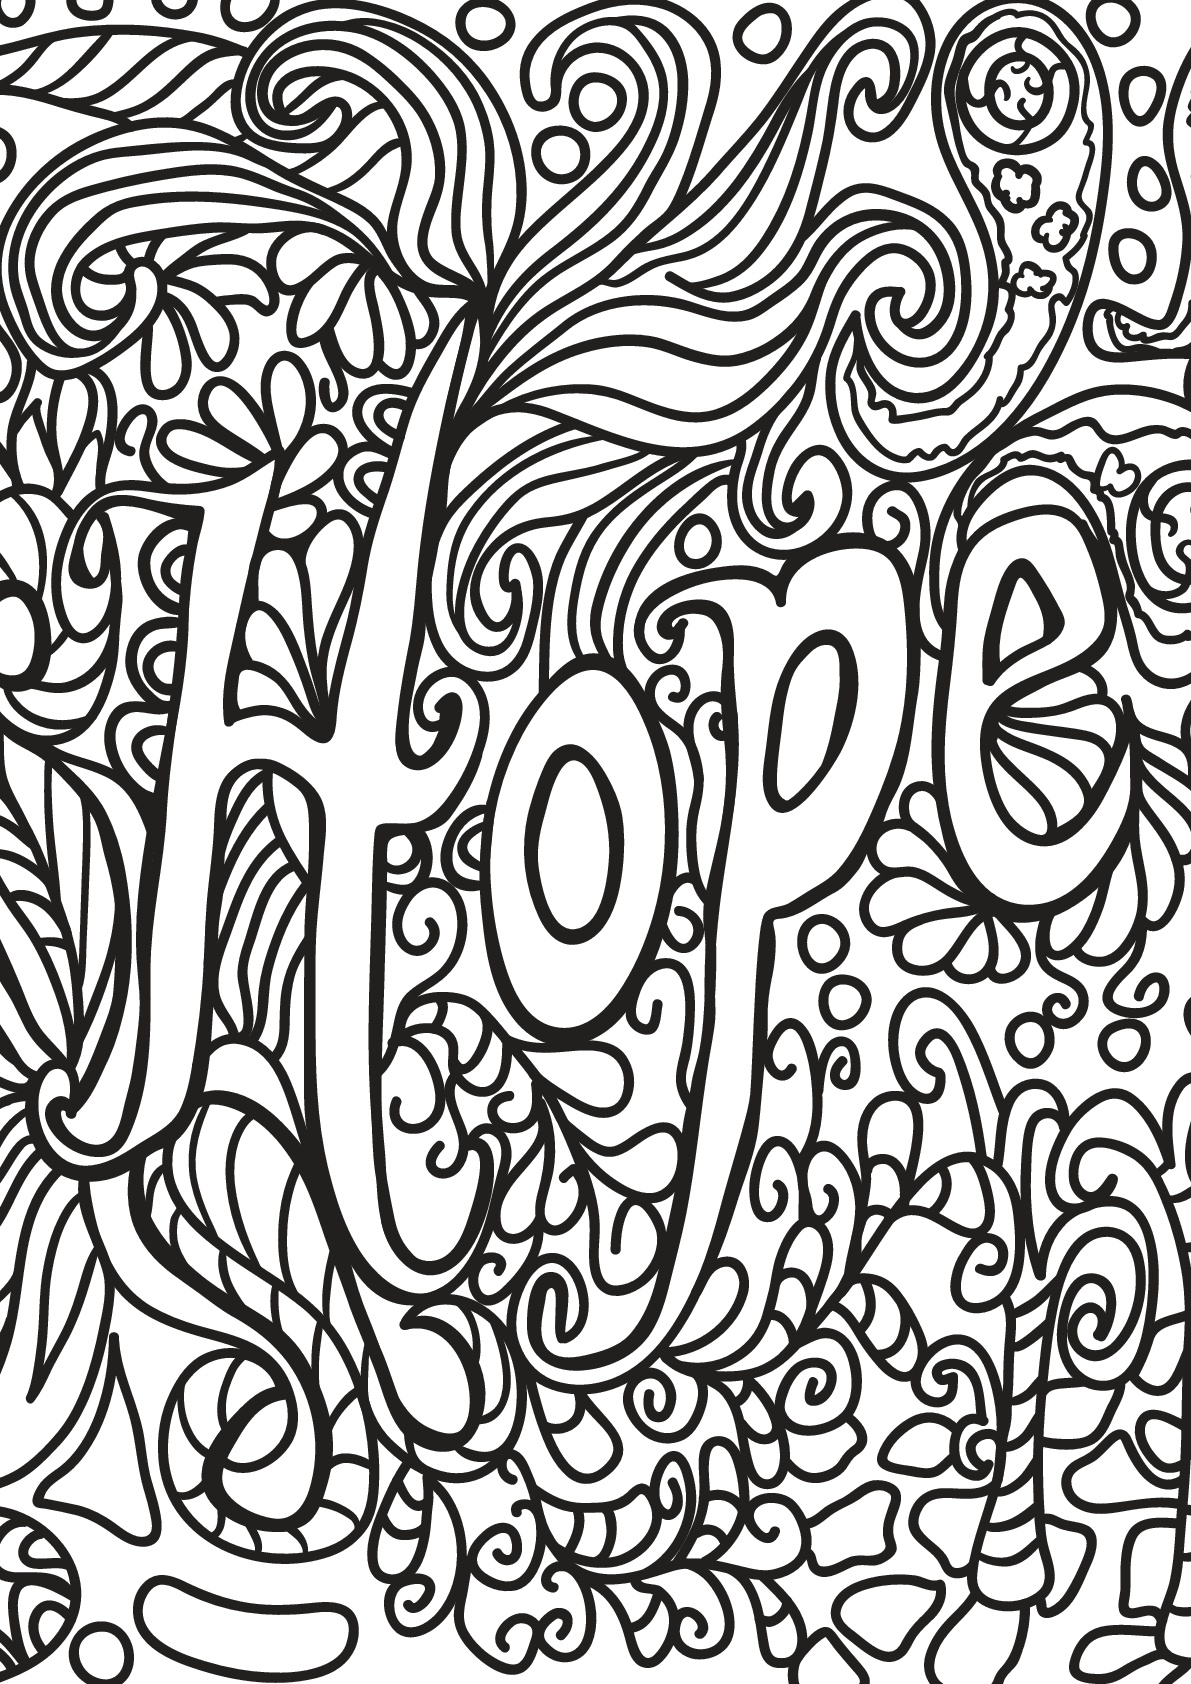 Free book quote - 5 - Positive & inspiring quotes Adult Coloring Pages